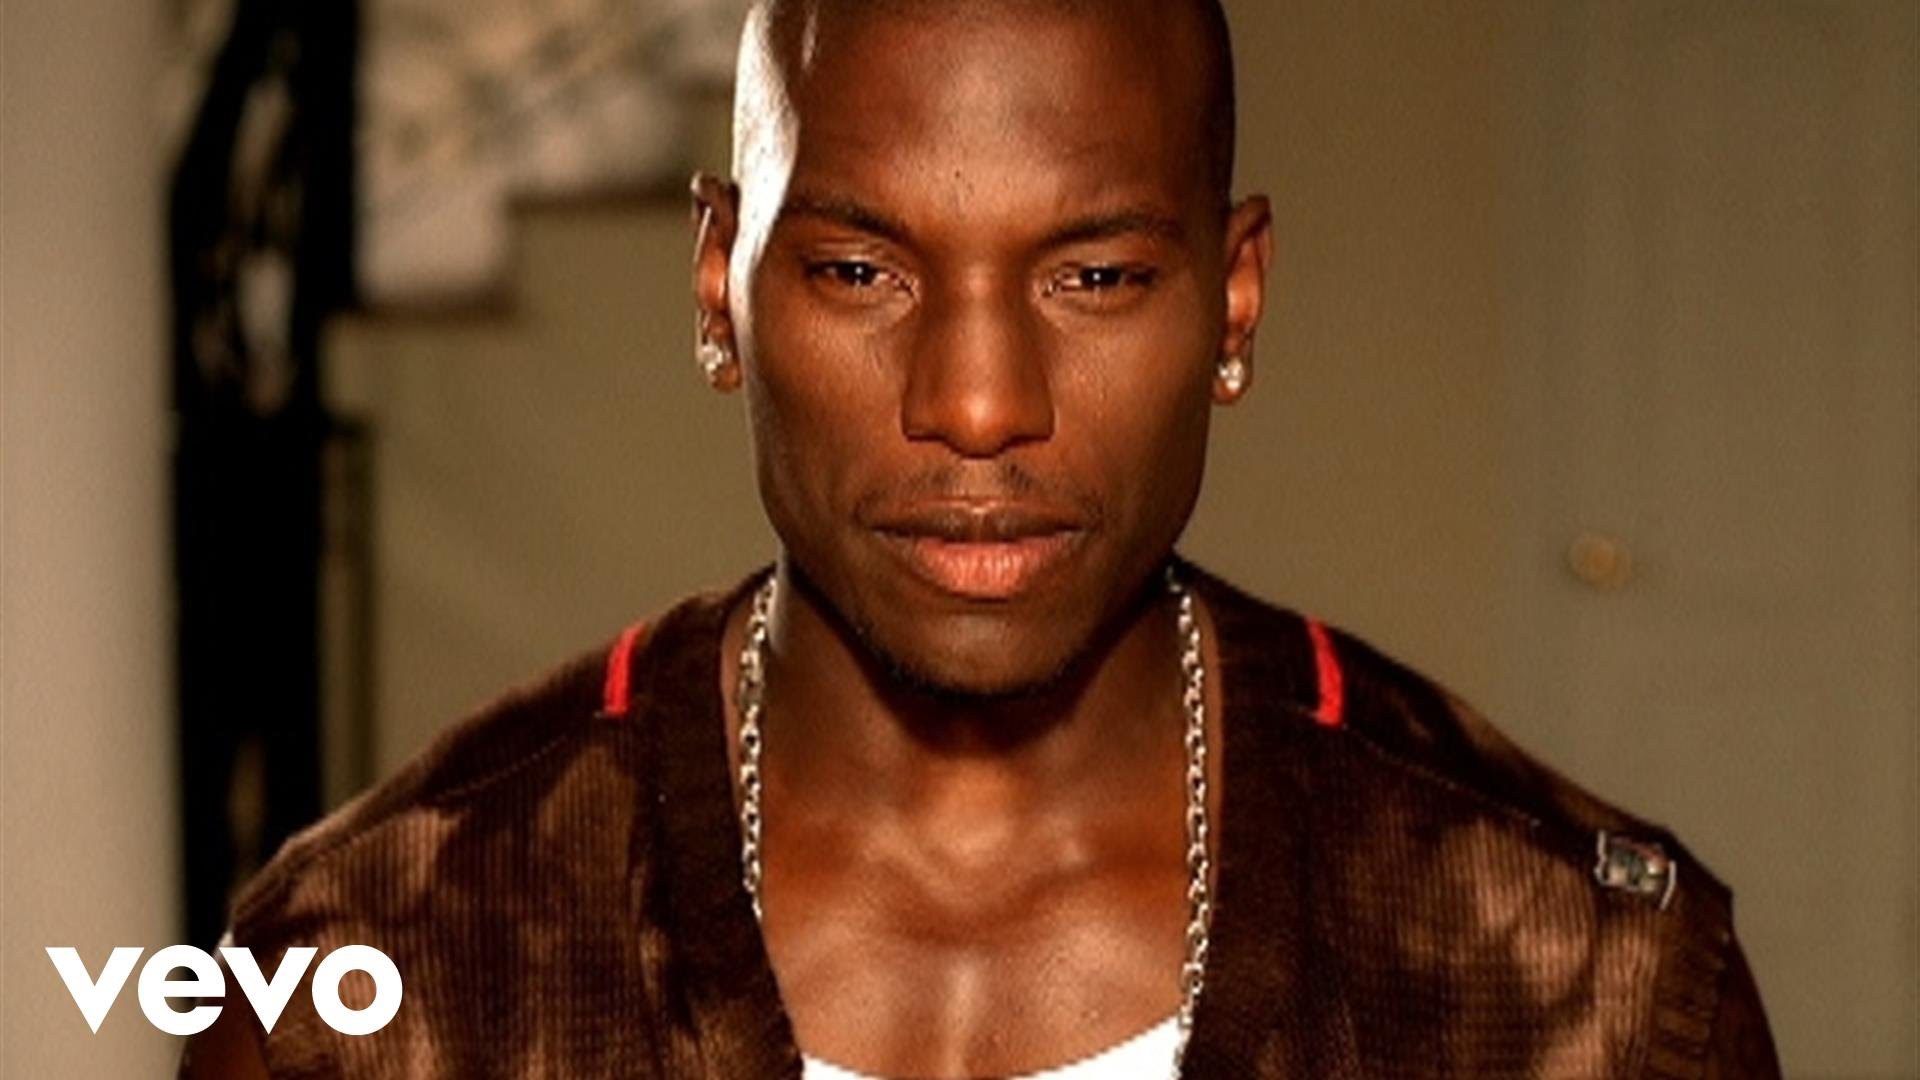 Tyrese Gibson Wallpapers Images Photos Pictures Backgrounds.